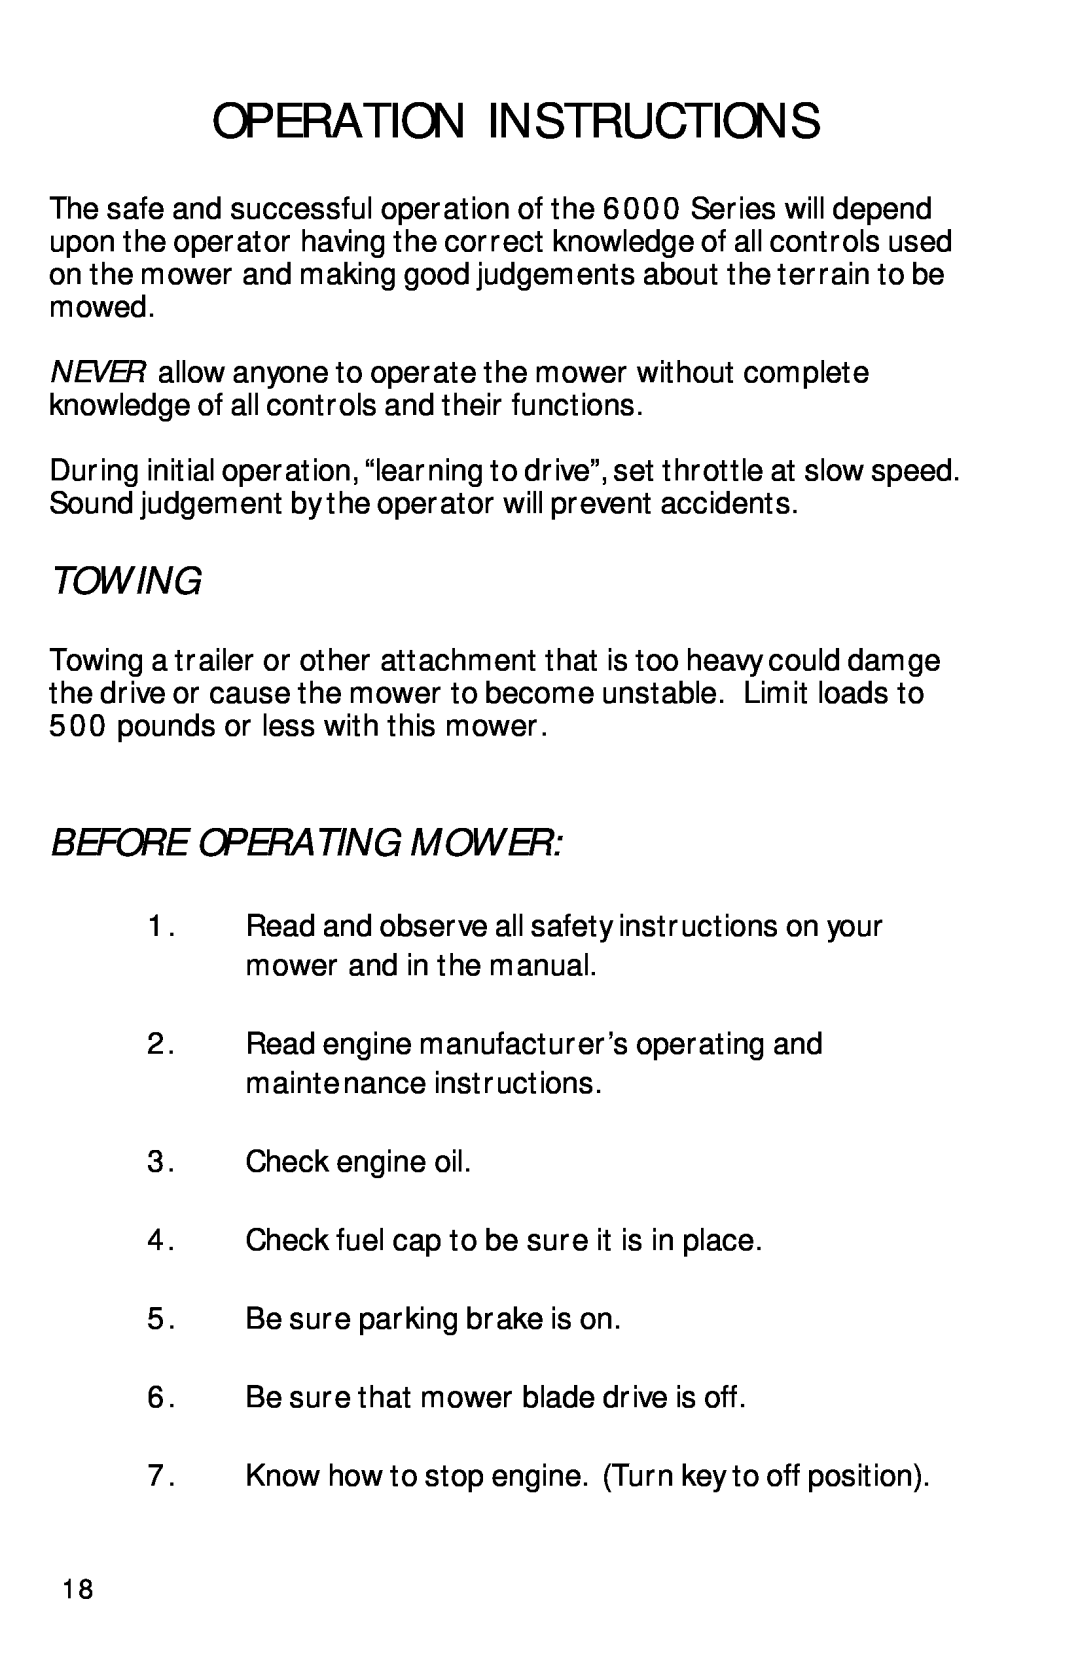 Dixon ZTR 6023, 13090-0601 manual Operation Instructions, Towing, Before Operating Mower 